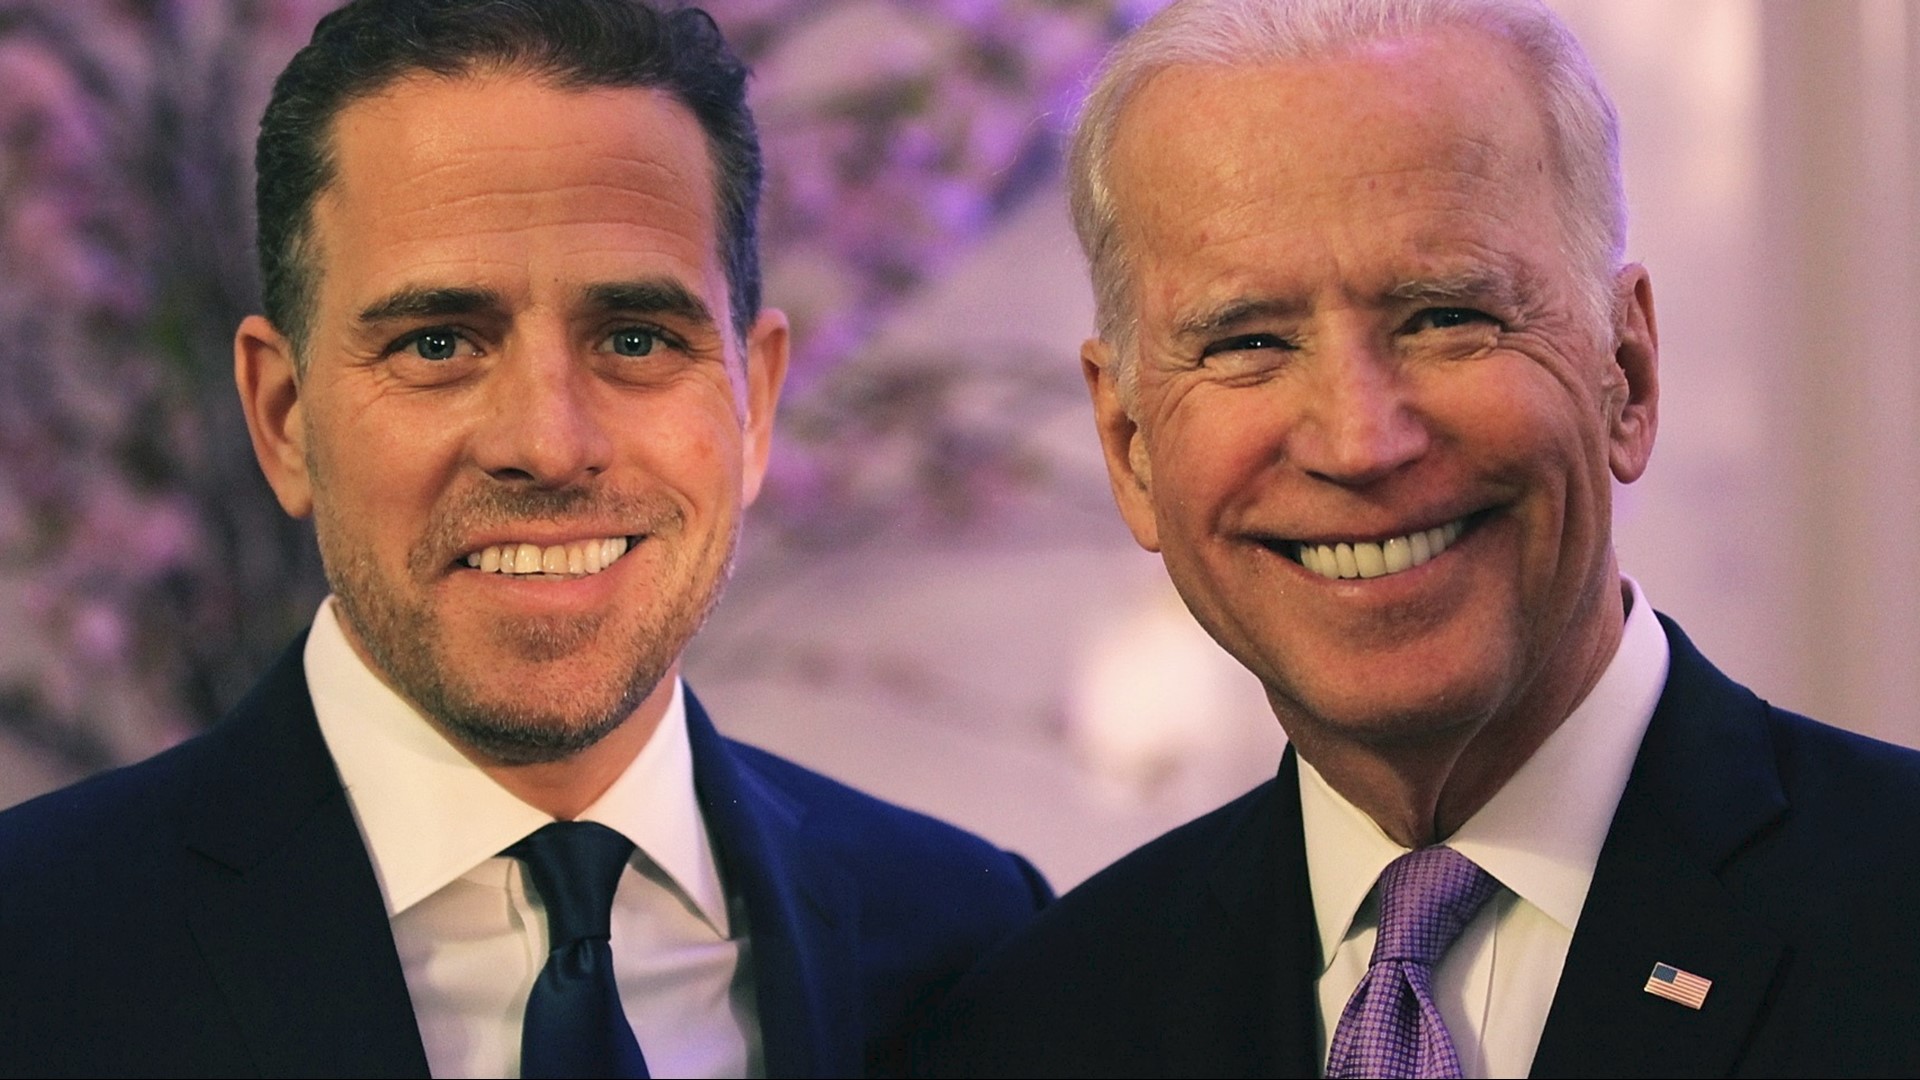 President Trump reportedly instructed officials to withhold funds to the Ukraine before he spoke with the country's president asking him to investigate the Biden family. Veuer's Justin Kircher has the story.